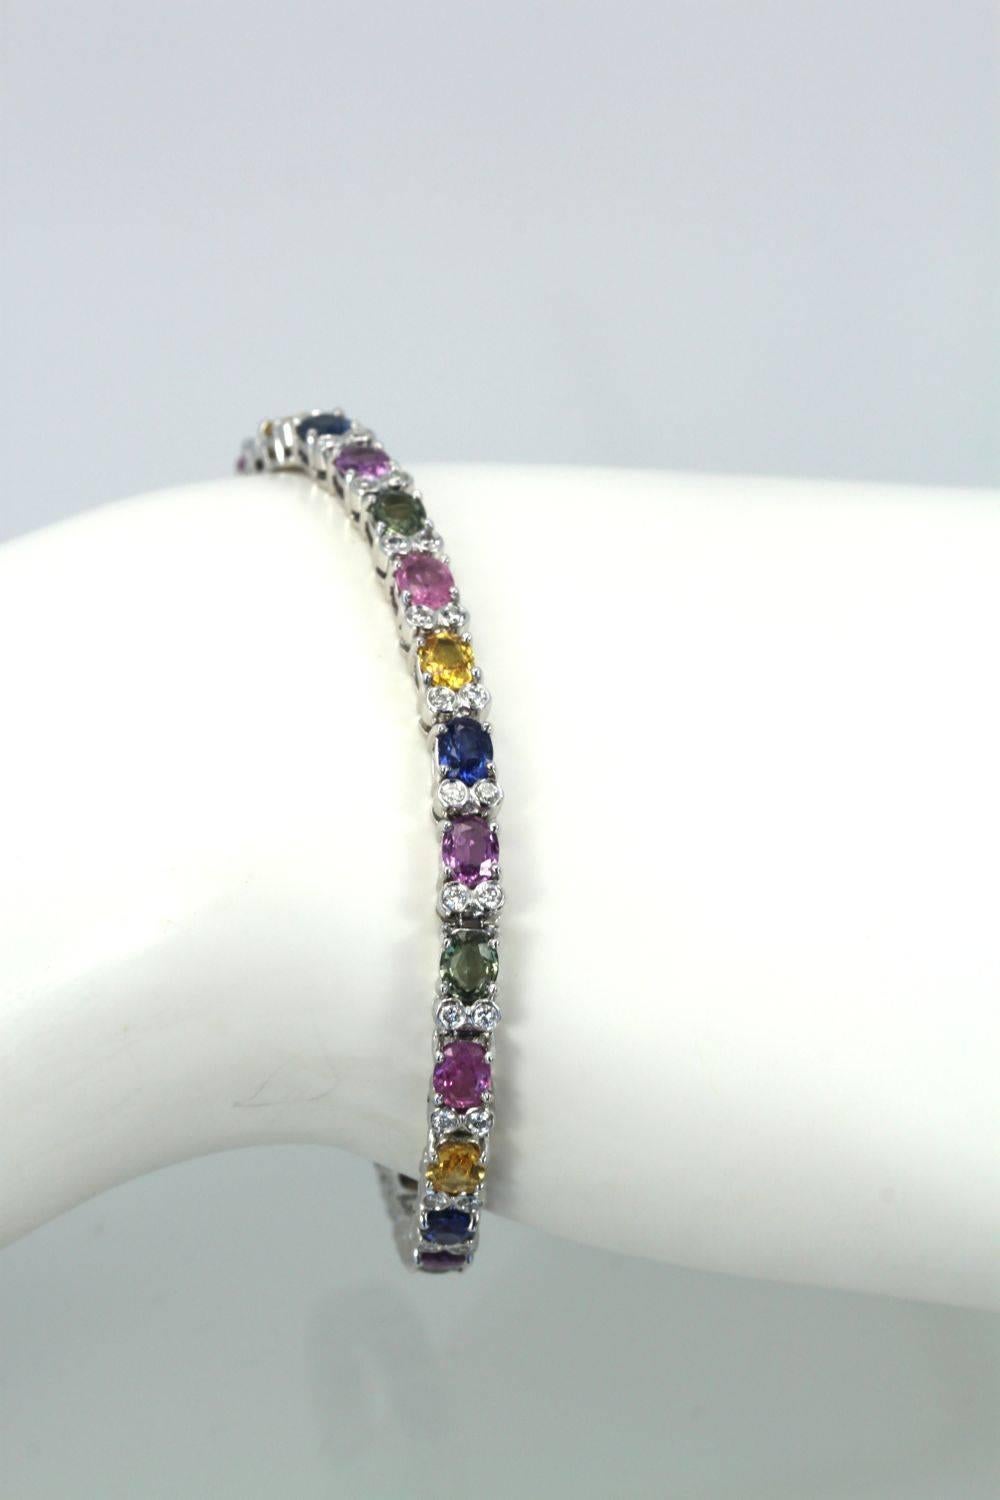 This Multi Colored Sapphire and Diamond Bracelet goes beautifully with the multi colored sapphire long chain and the tassel earrings in another listing. I just love fancy colored Sapphires as the number of colors they come in is just astounding!  I